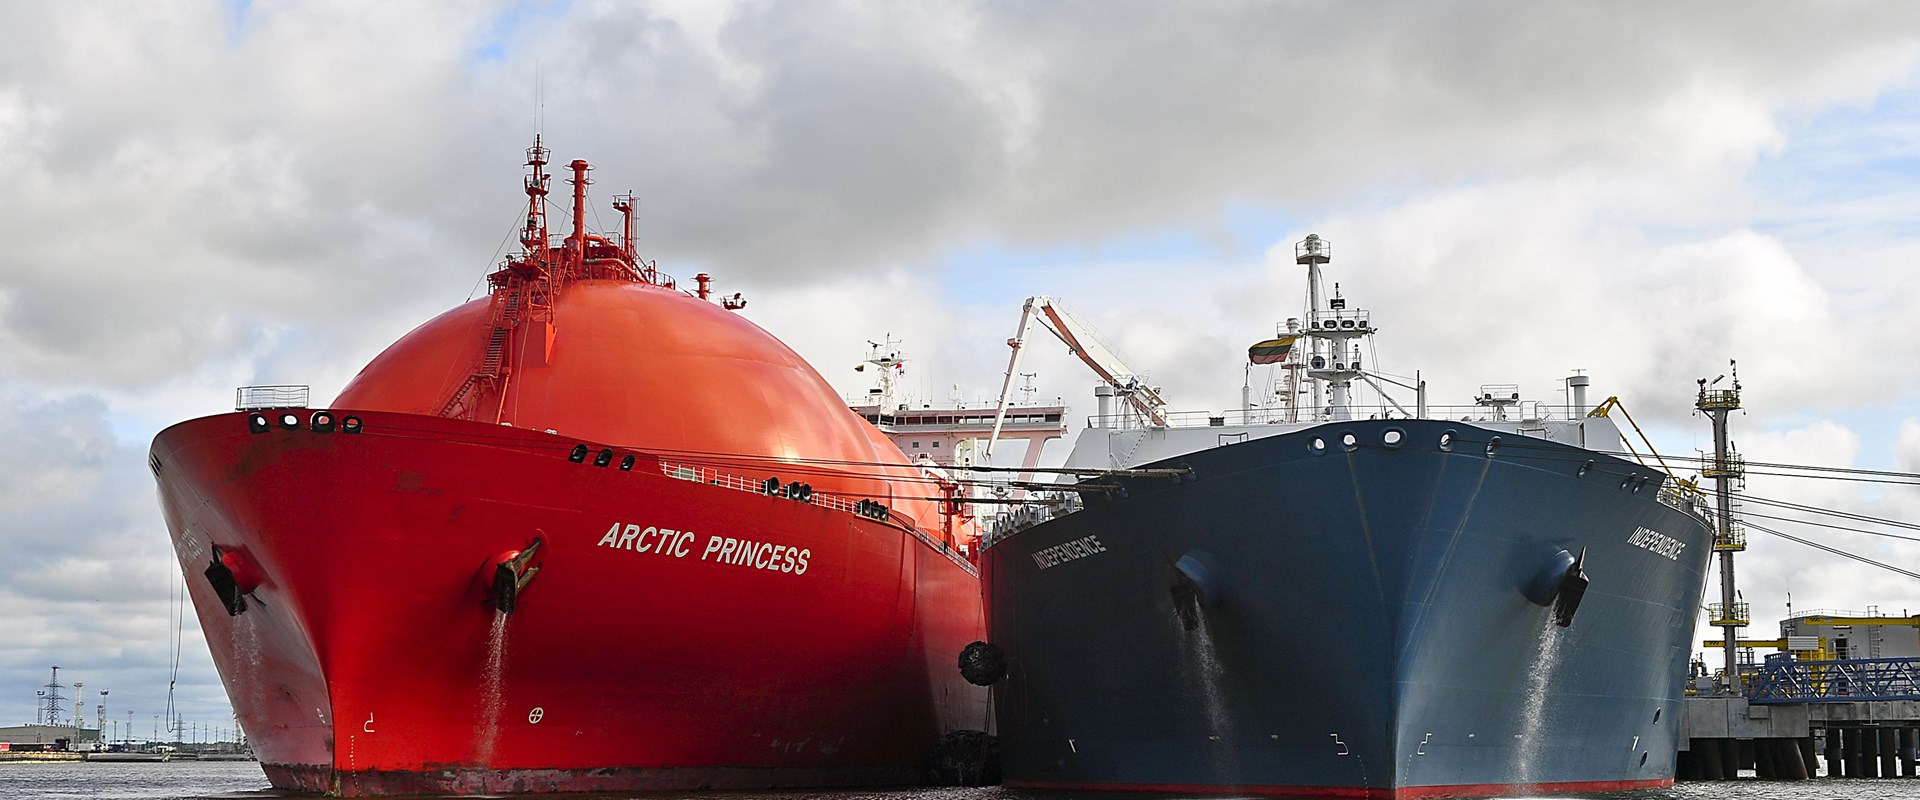 A Liquified Natural Gas vessel alongside another vessel in port